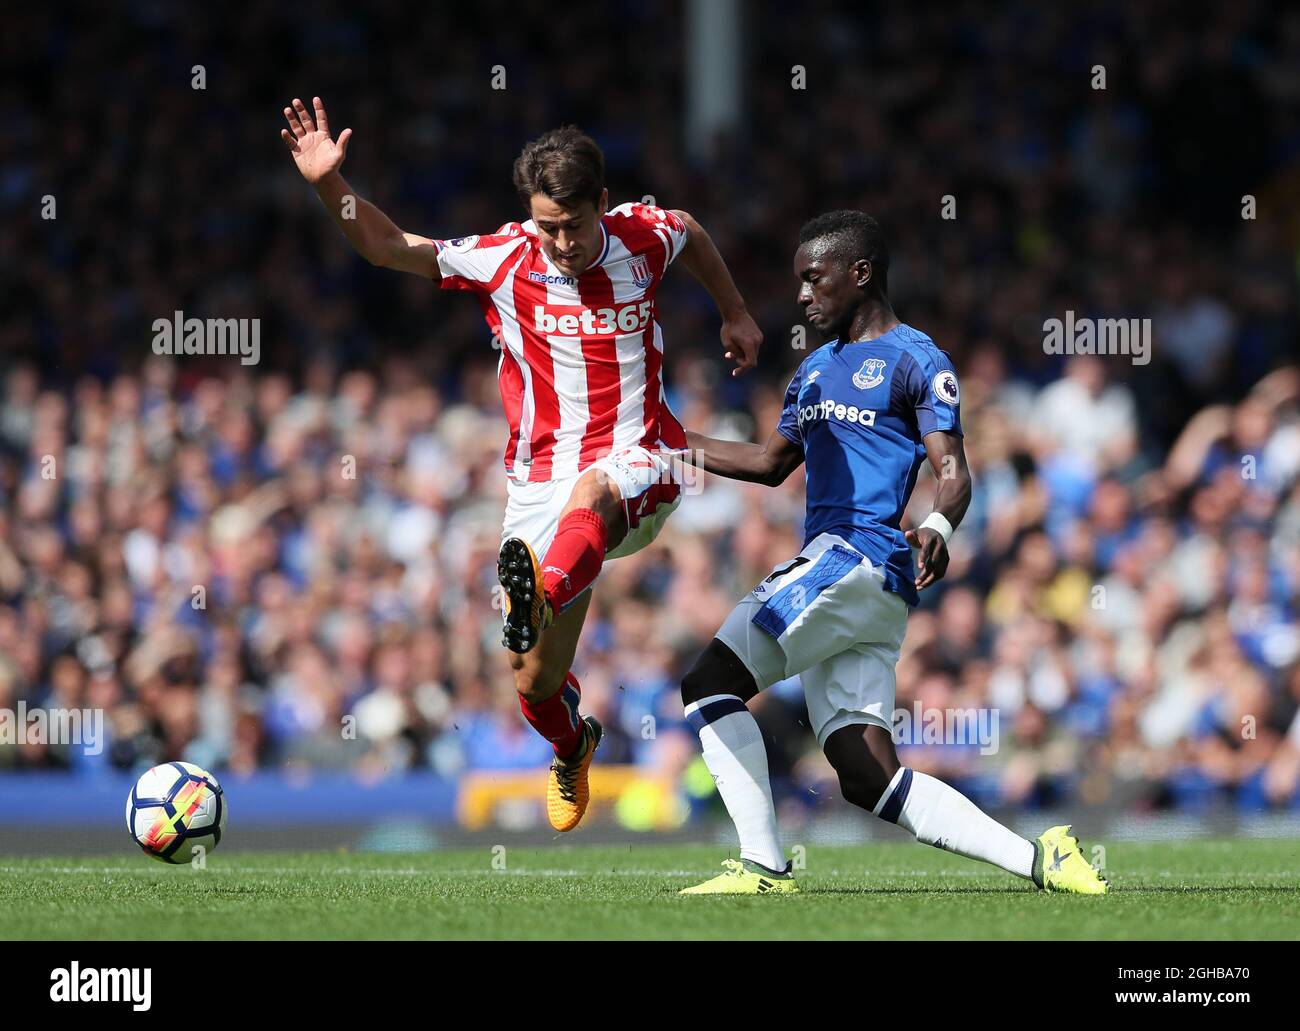 Everton's Idrissa Gana Gueye tussles with Stoke's Bojan during the premier league match at Goodison Park, Liverpool. Picture date 12th August 2017. Picture credit should read: David Klein/Sportimage via PA Images Stock Photo